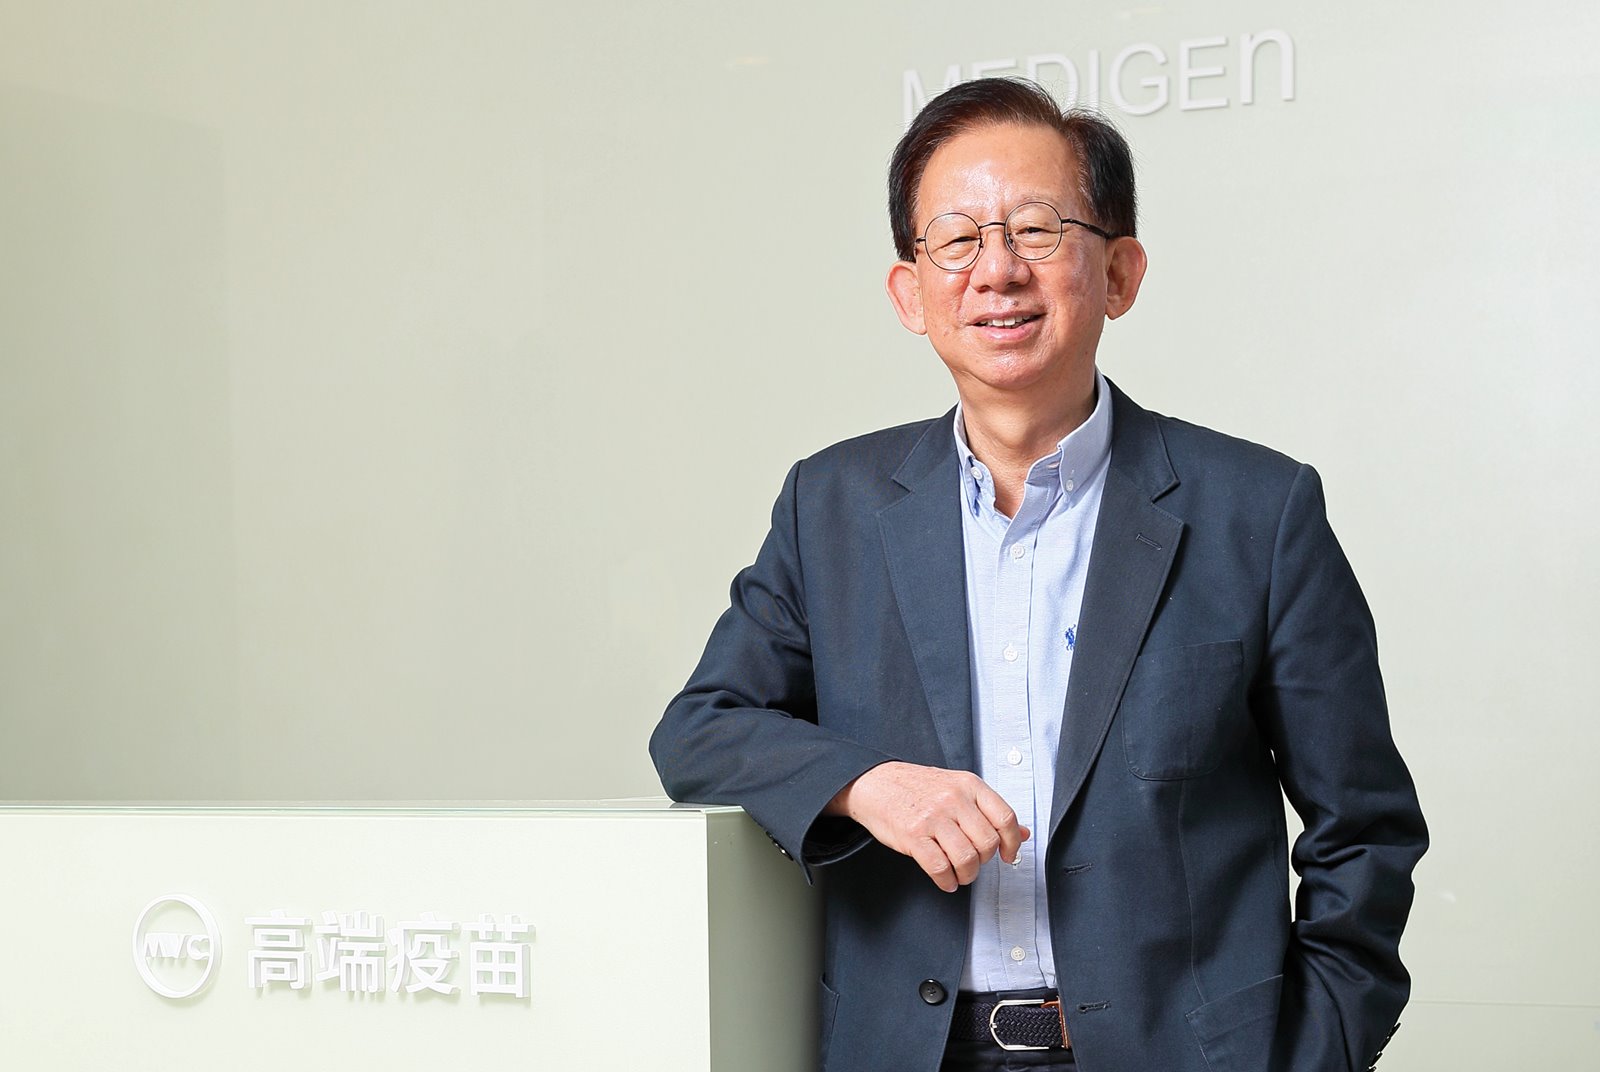 How did Medigen make Taiwan’s first homegrown COVID-19 vaccine?